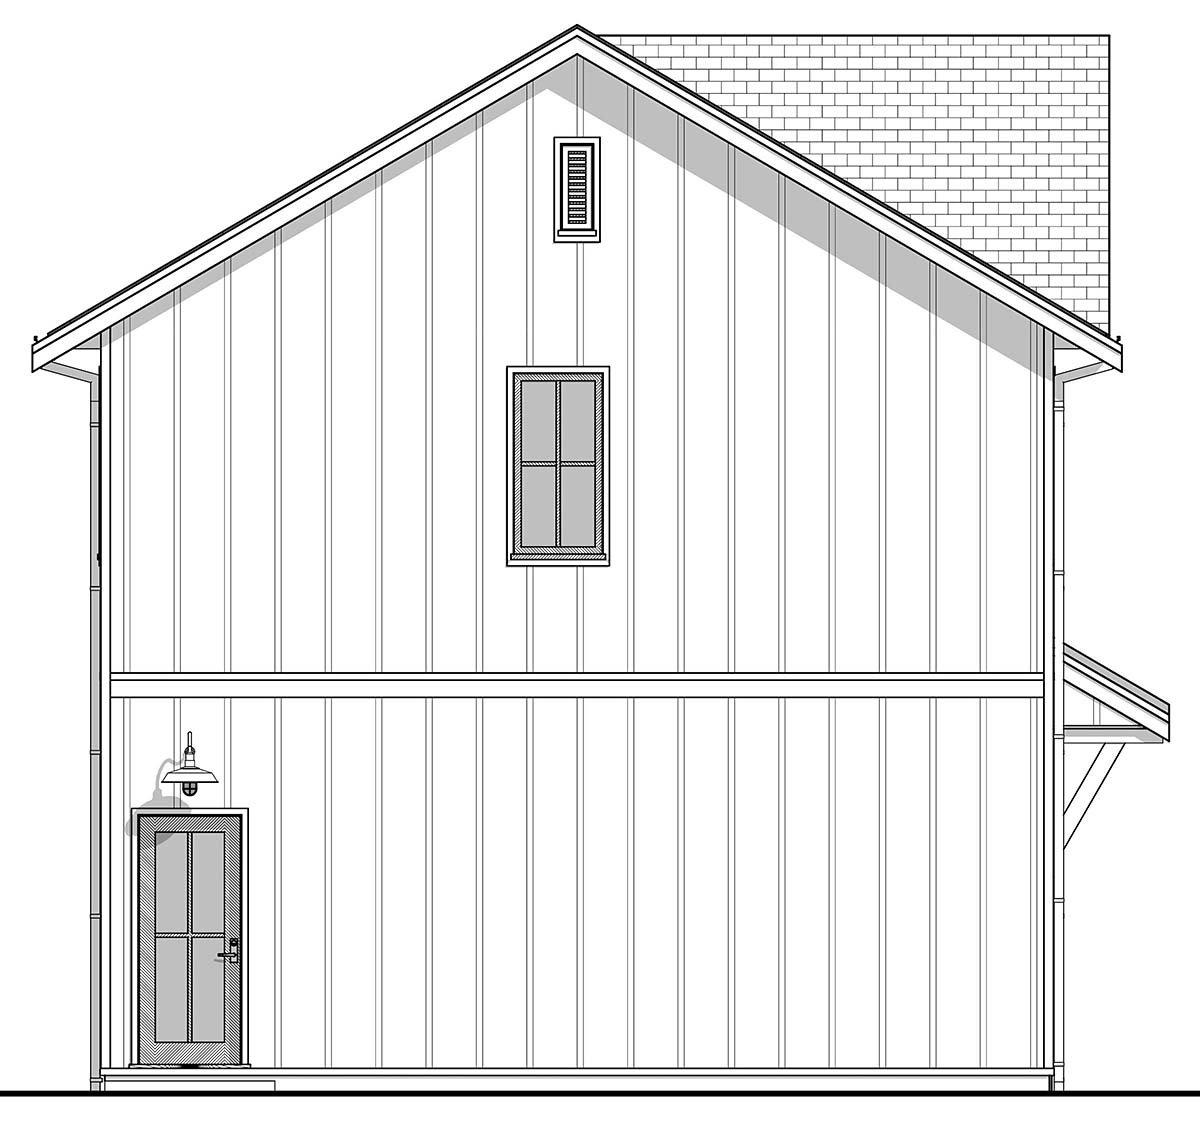 Cottage, Country, Farmhouse, New American Style, Traditional Plan with 899 Sq. Ft., 2 Bedrooms, 2 Bathrooms, 3 Car Garage Picture 3